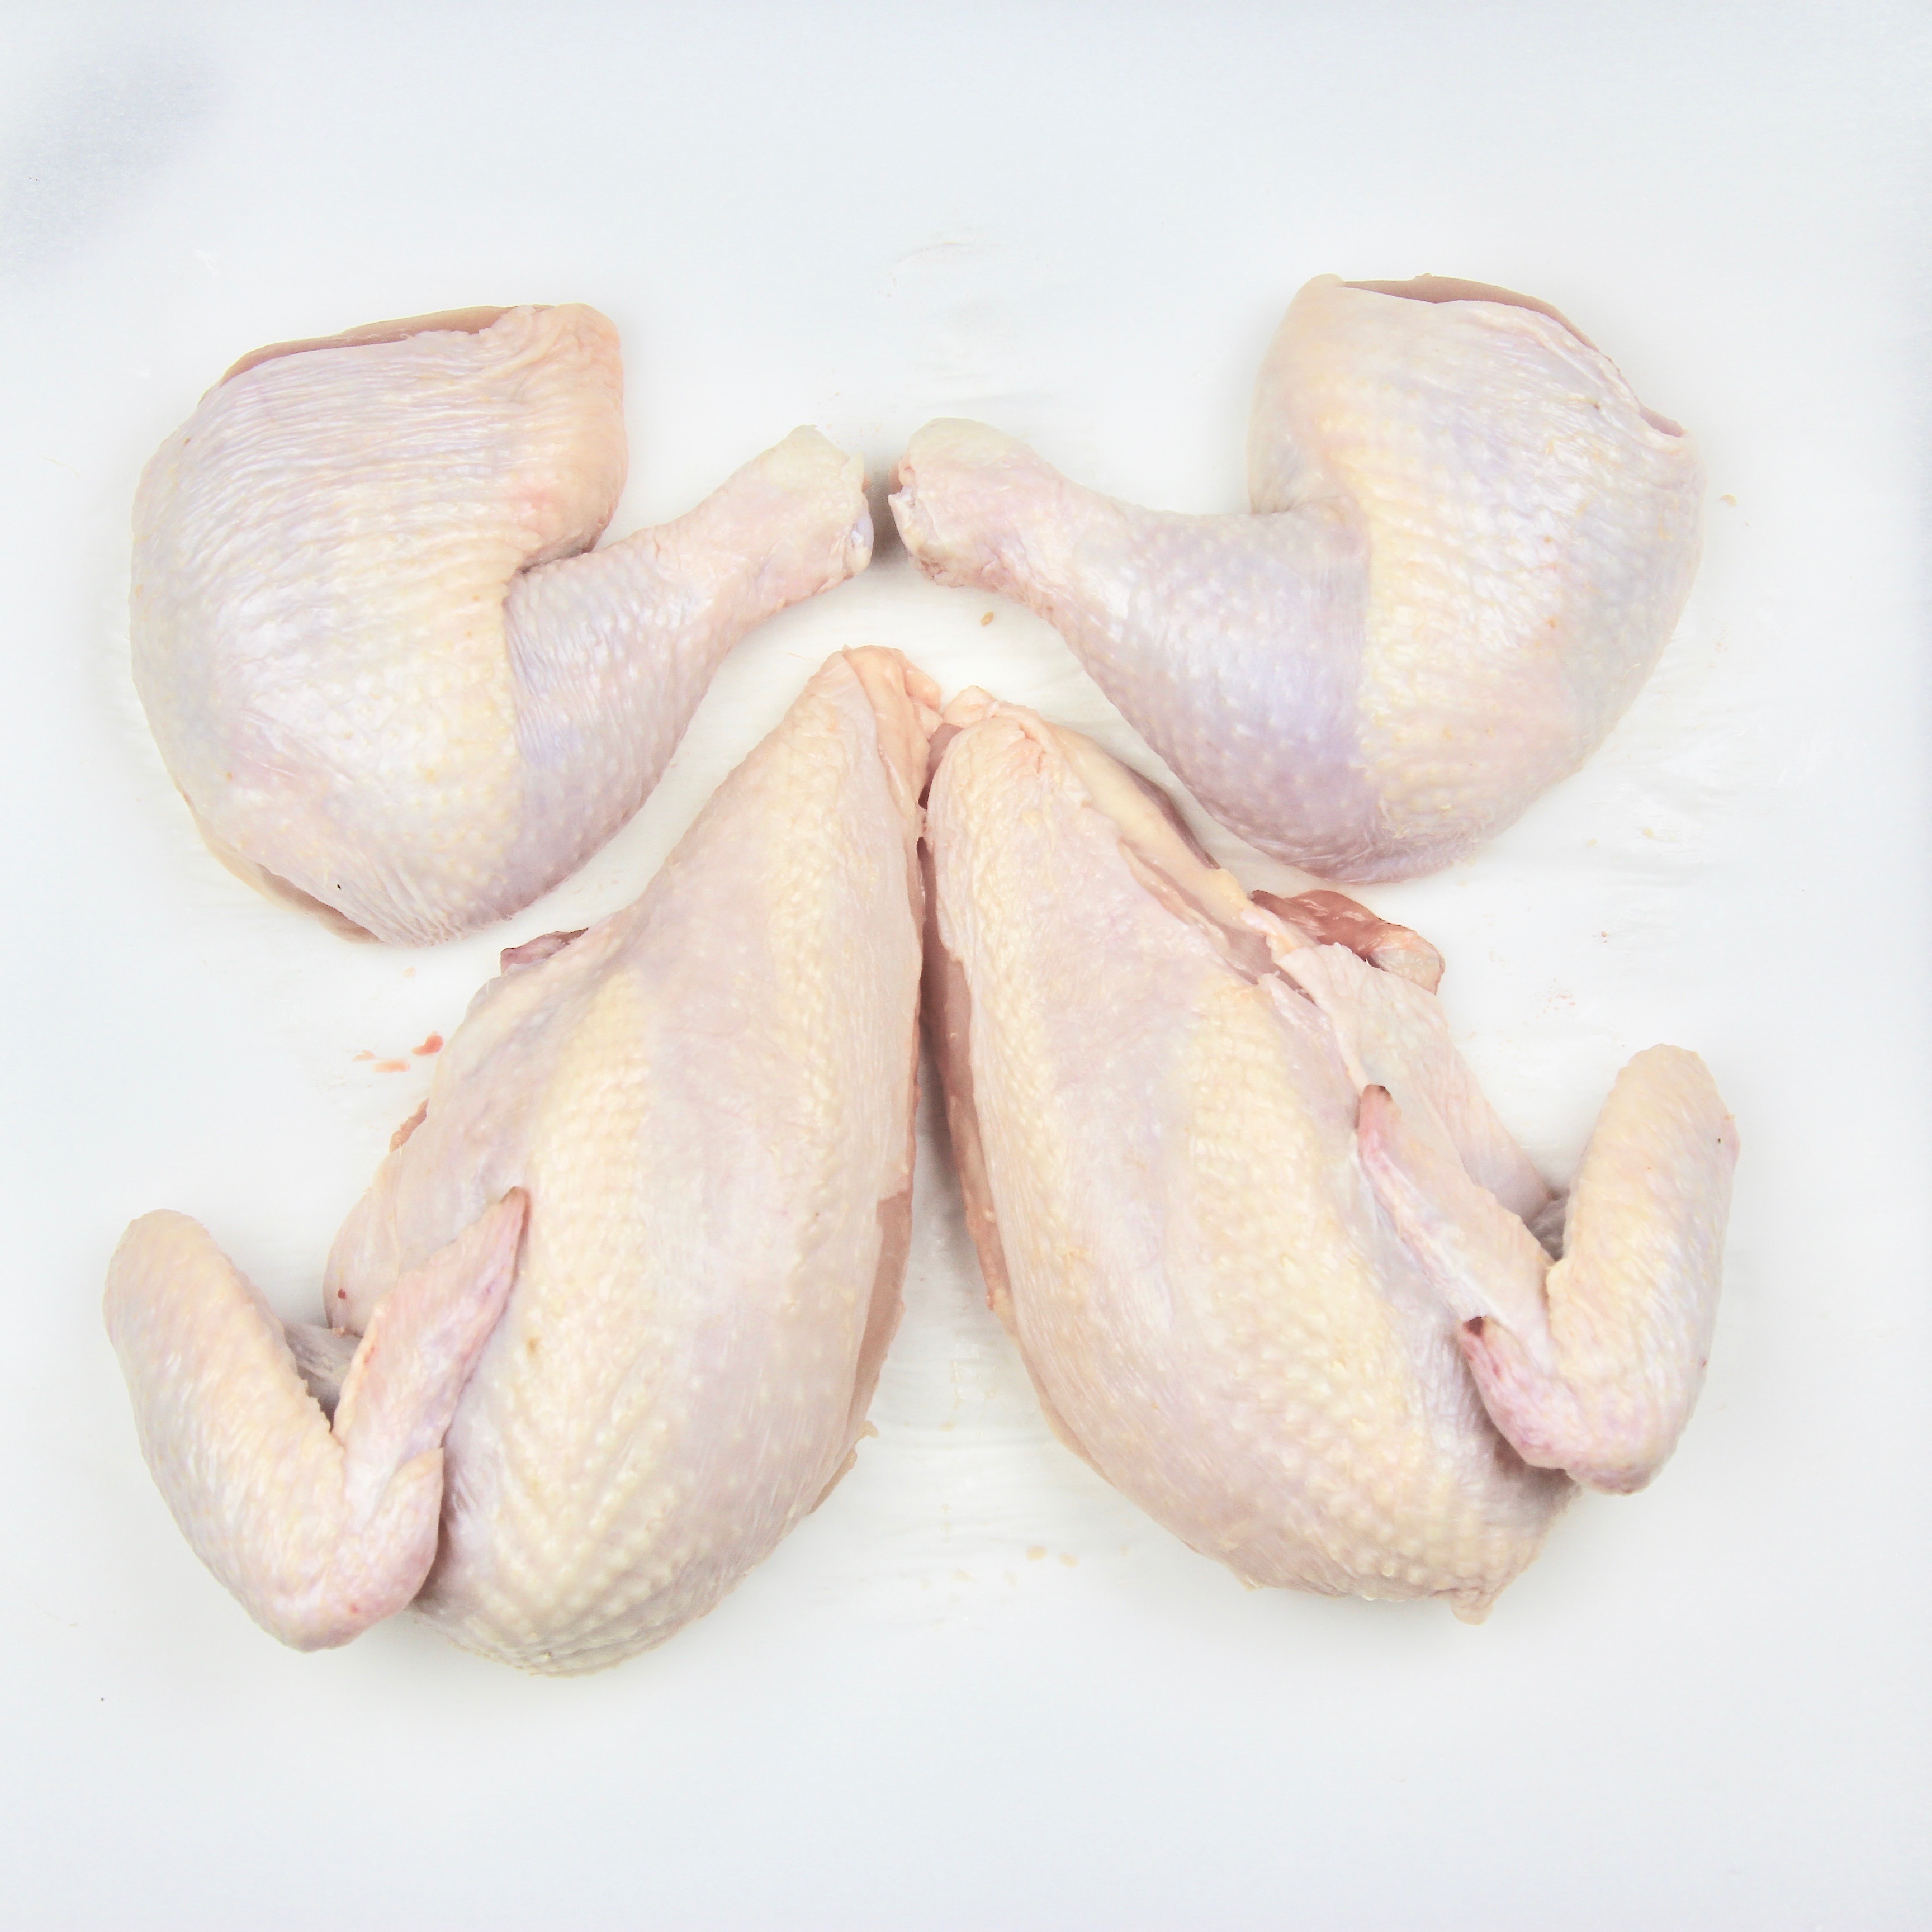 How-to-cut-up-a-whole-chicken-Step-Three